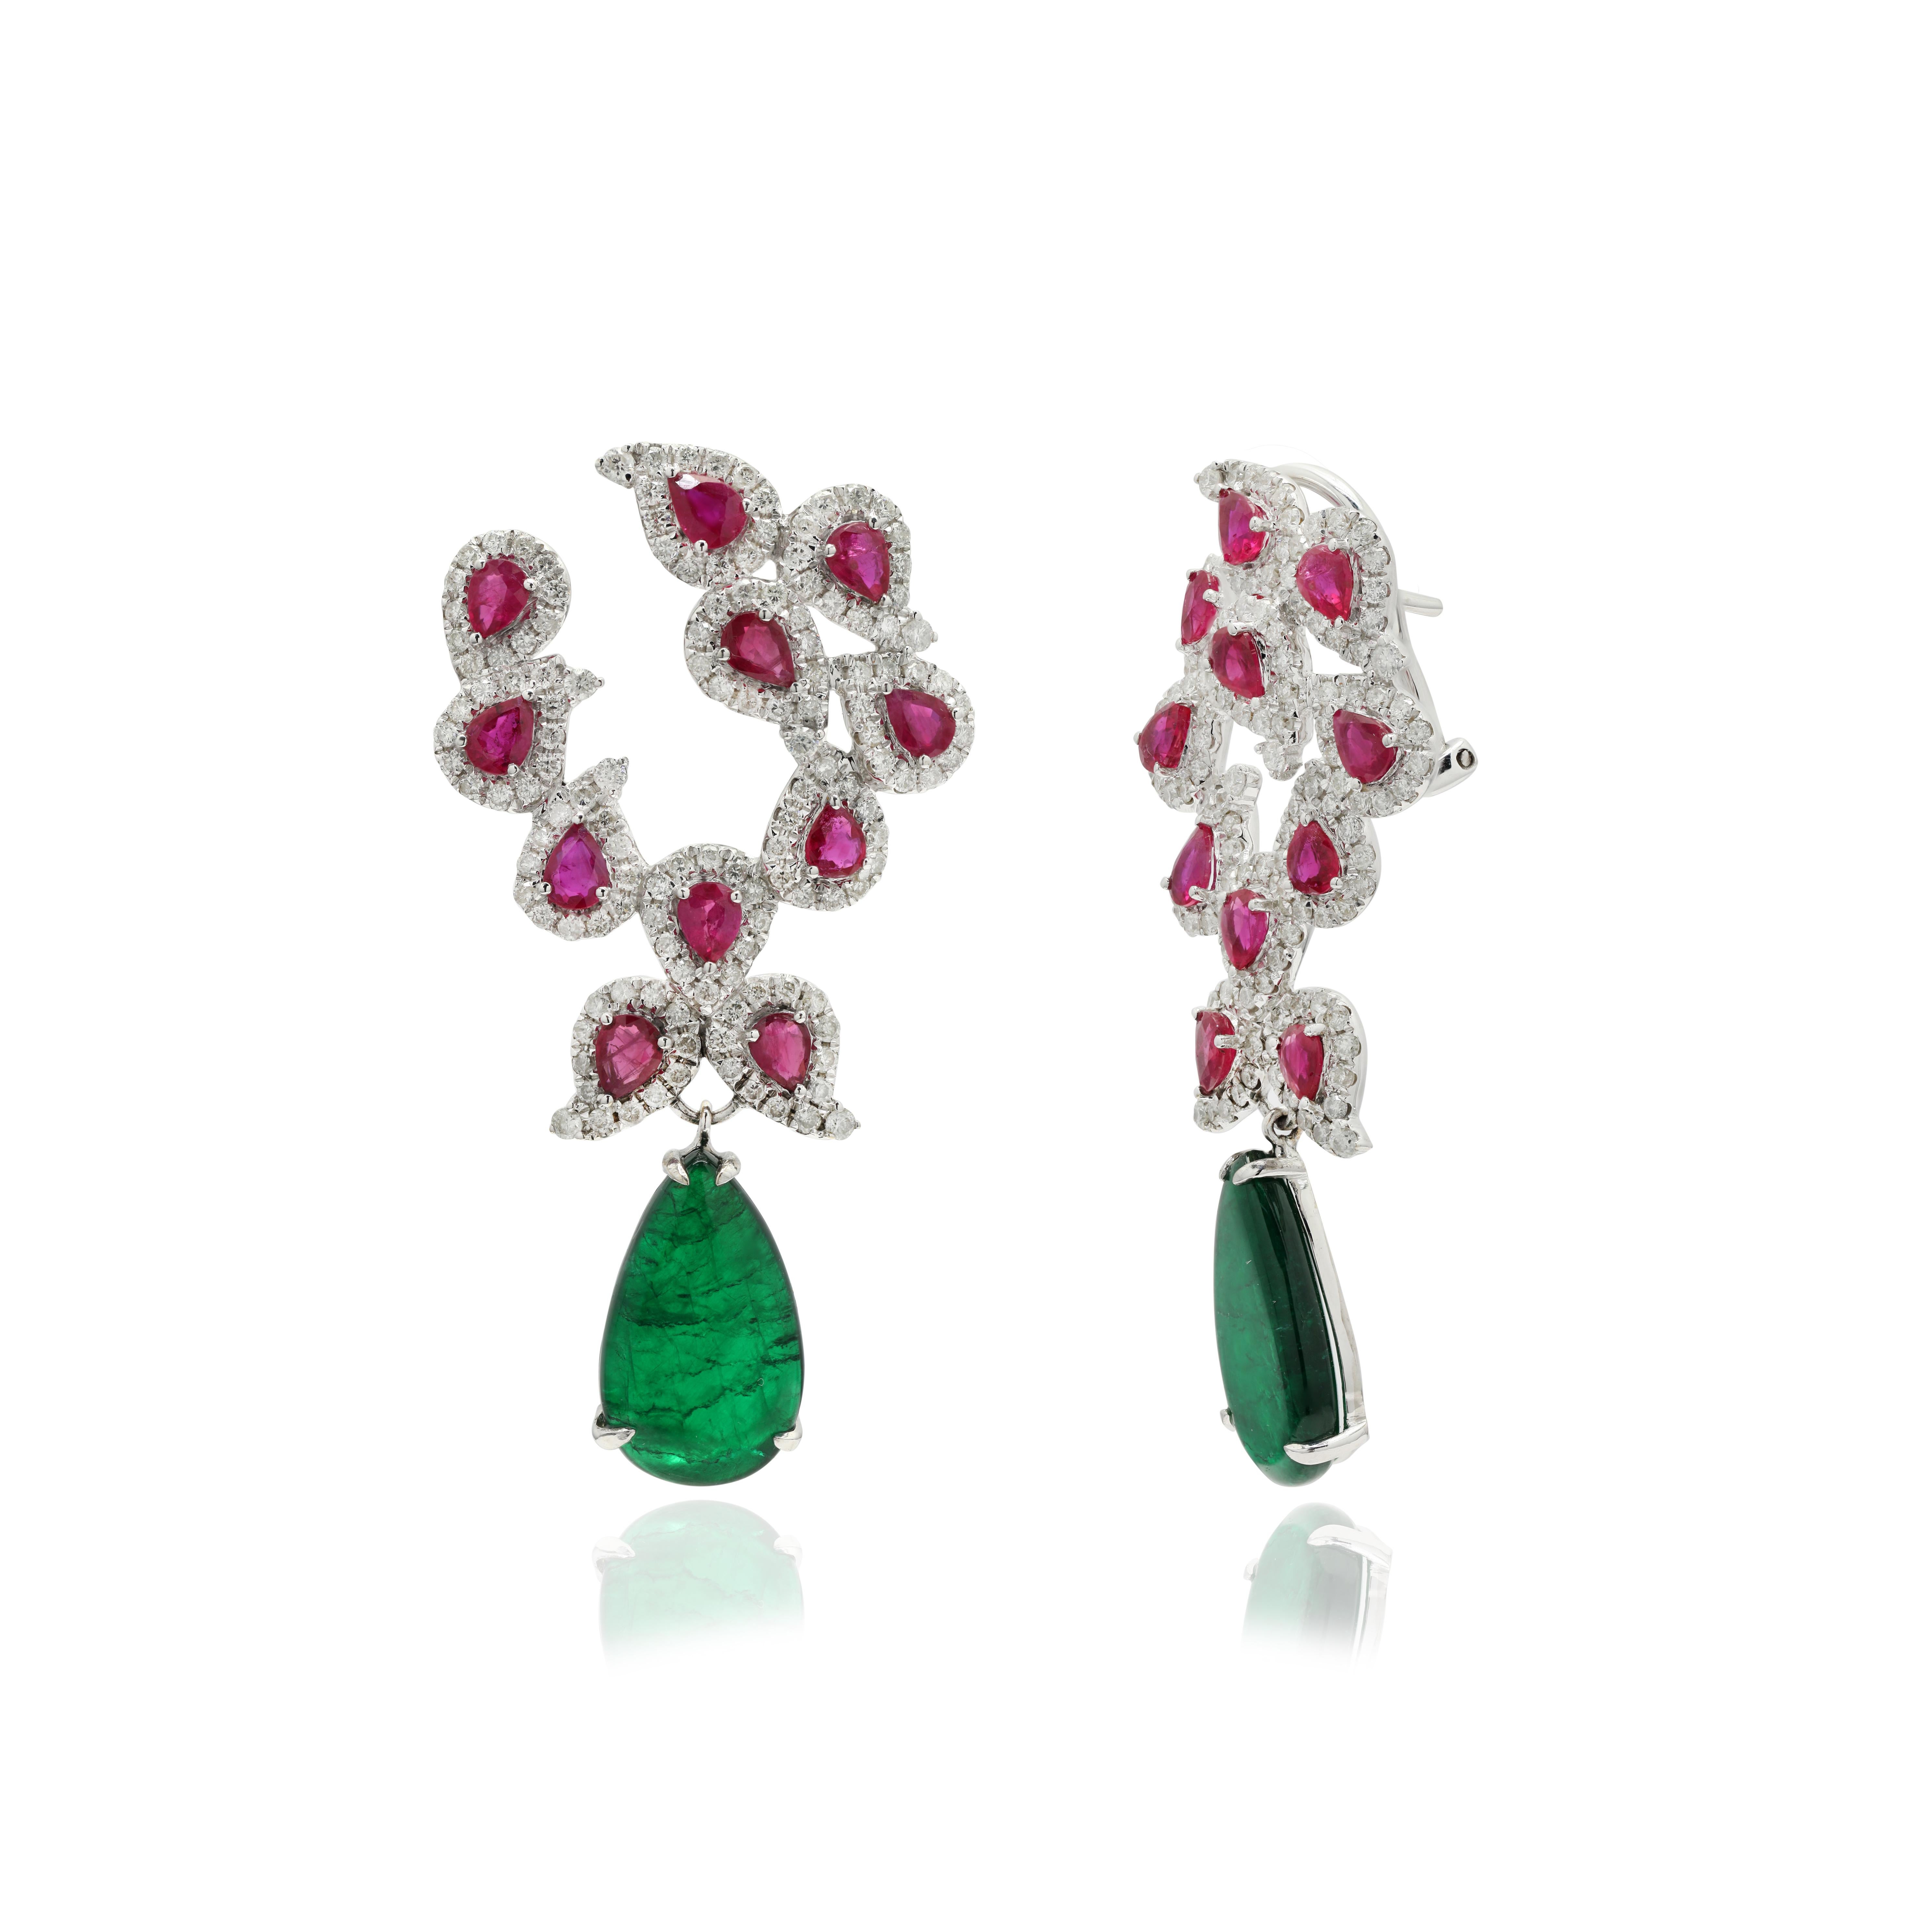 Ruby and Emerald Dangle earrings to make a statement with your look. These earrings create a sparkling, luxurious look featuring pear cut gemstone.
If you love to gravitate towards unique styles, this piece of jewelry is perfect for you.

PRODUCT